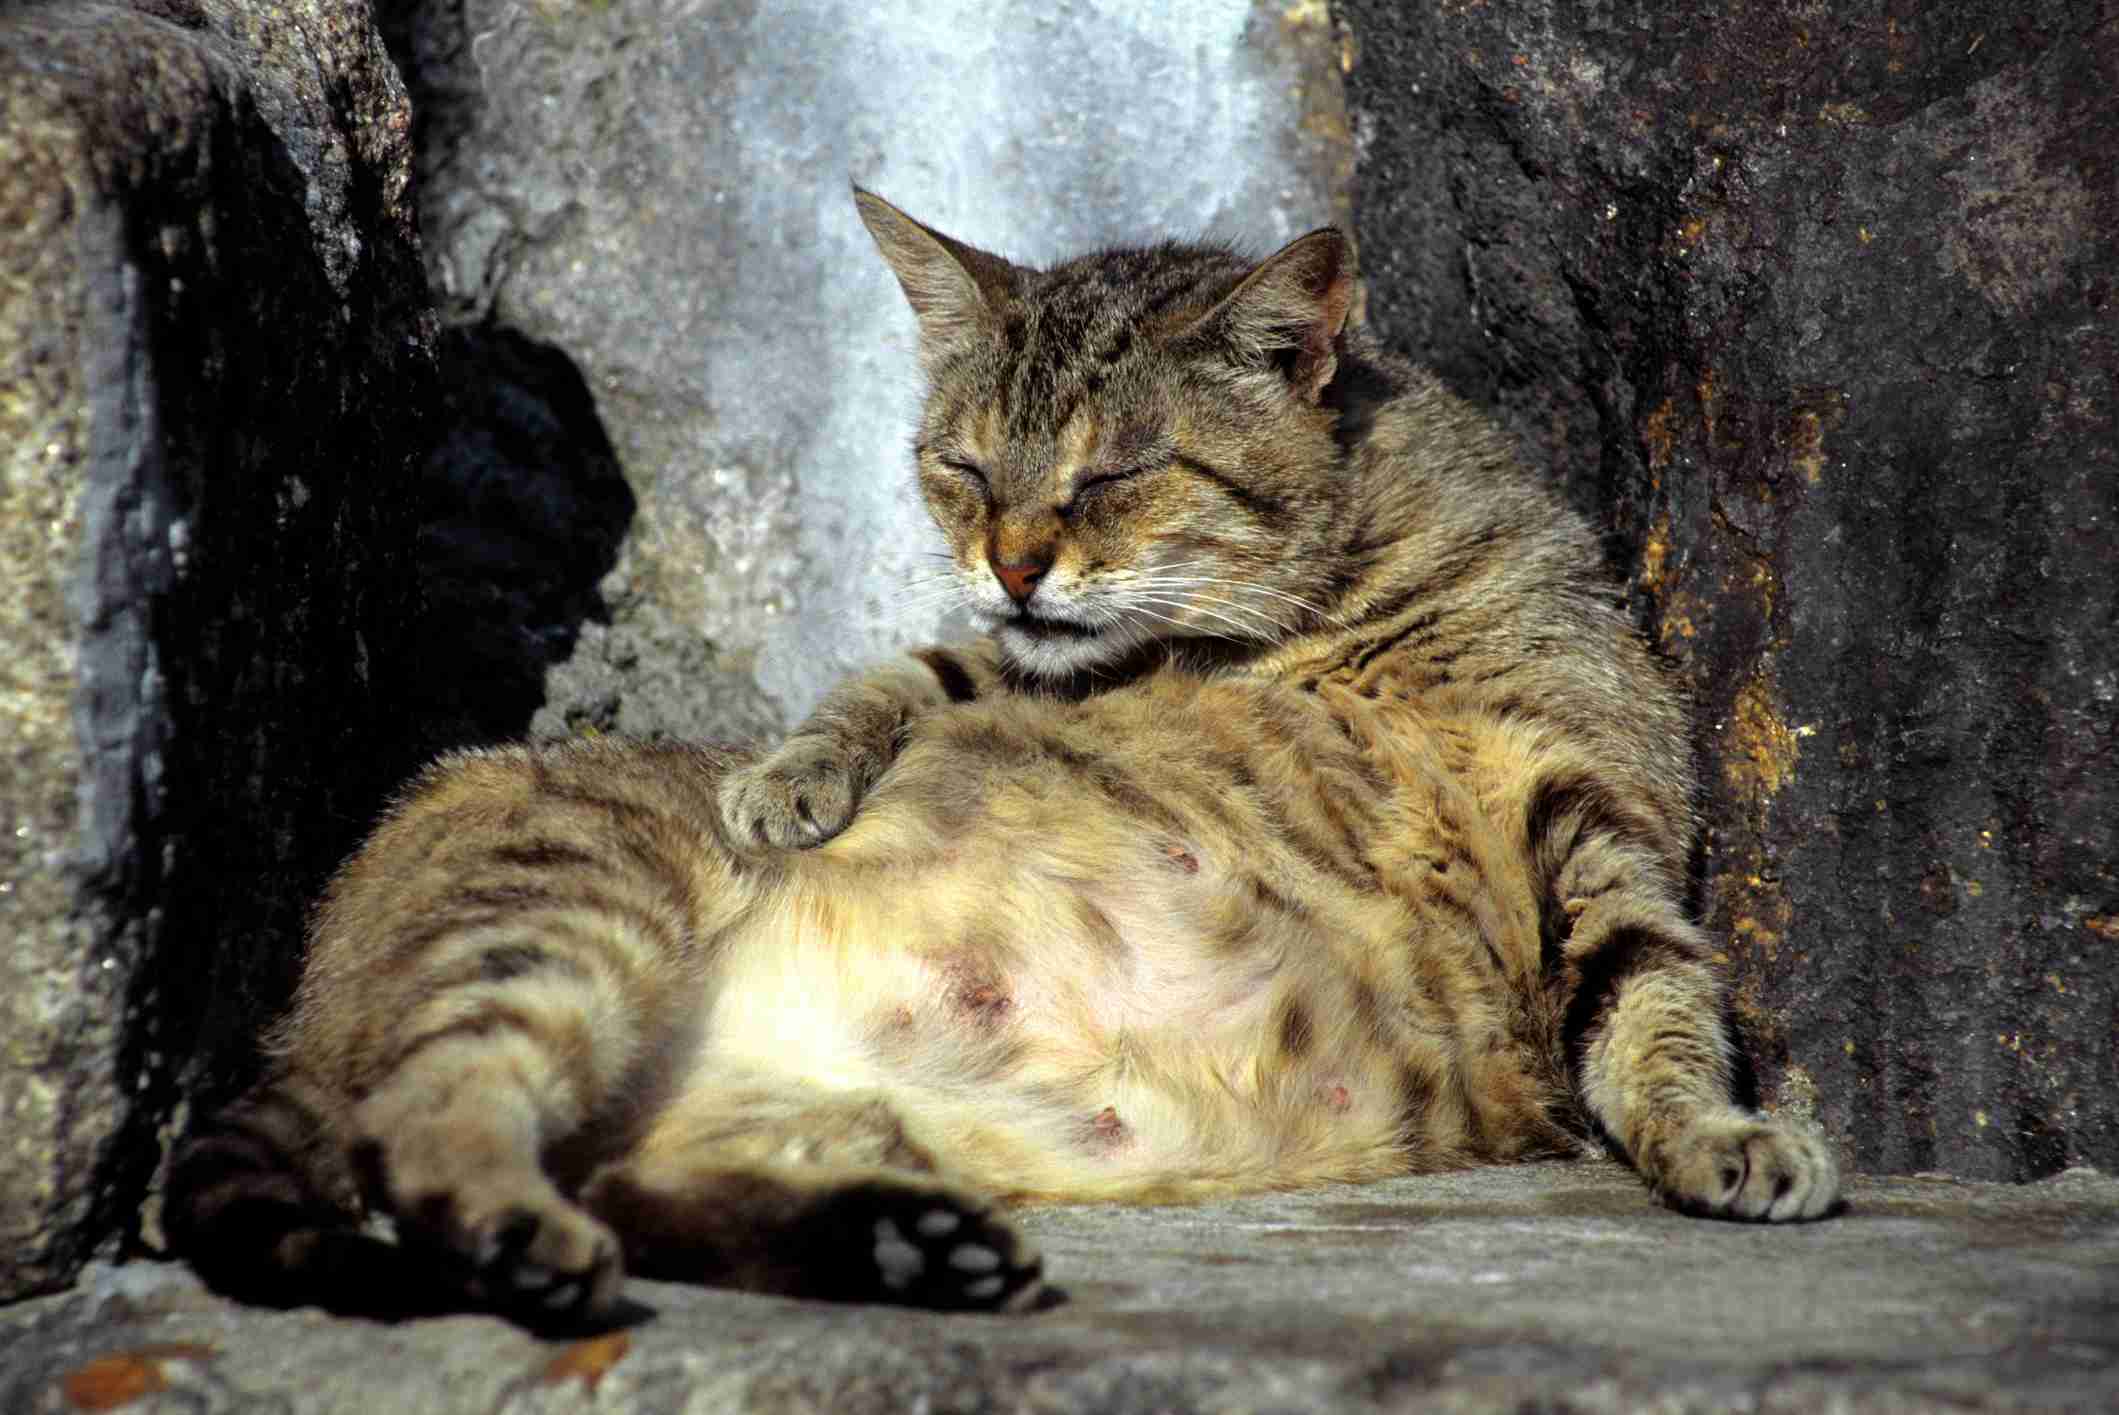 Nesting, anxious looking cat at the end of pregnancy